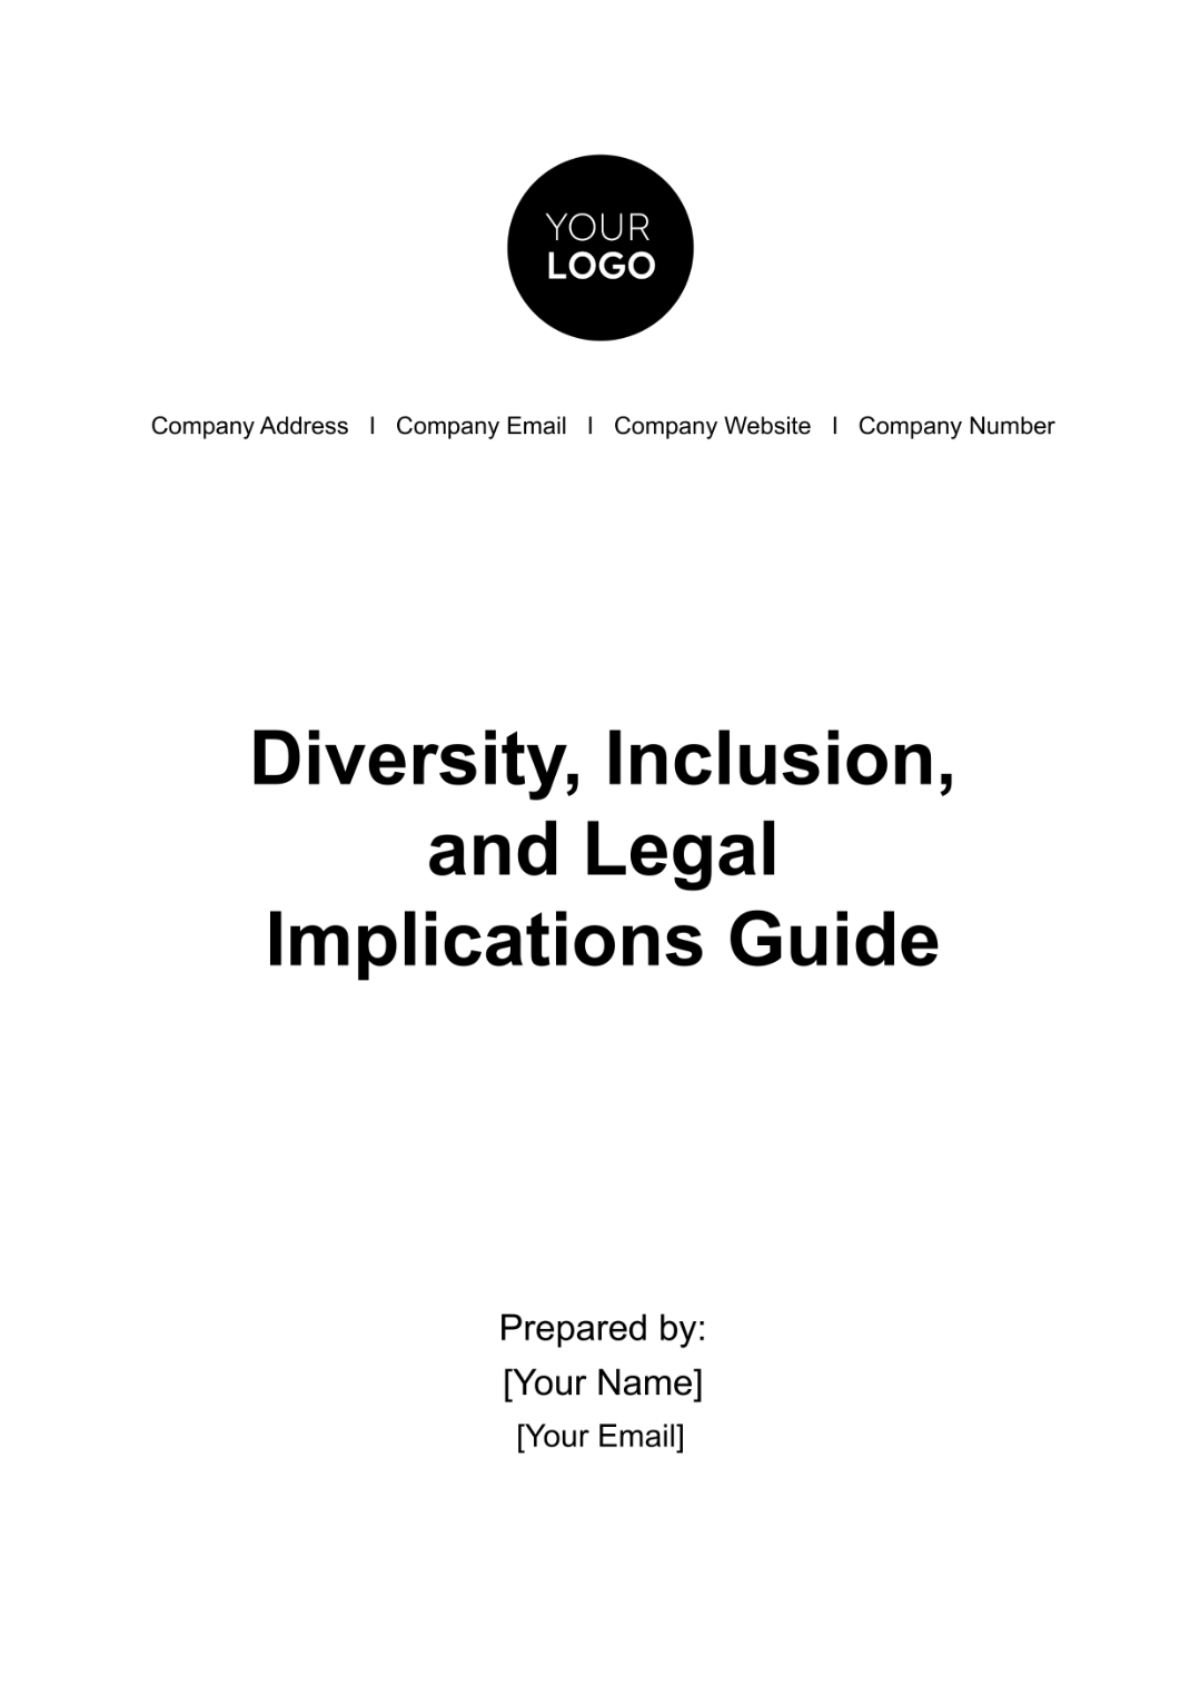 Free Diversity, Inclusion, and Legal Implications Guide HR Template